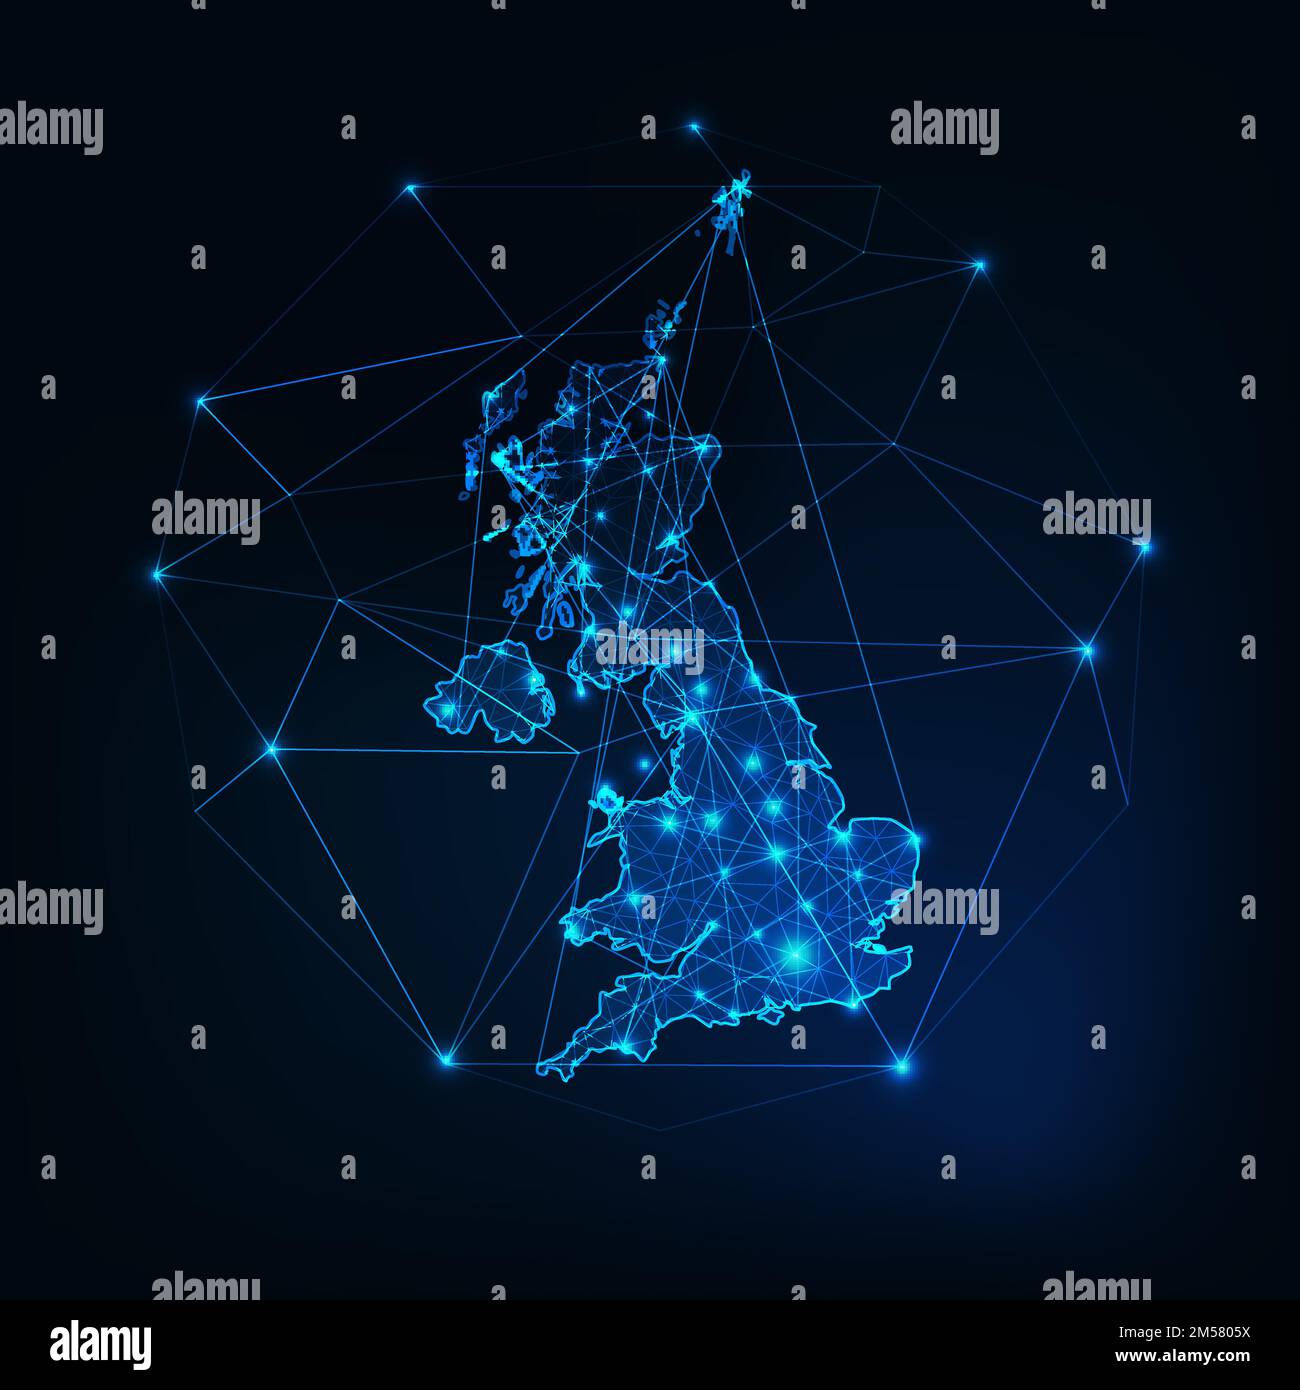 Map of uk and northern europe map Stock Vector Images - Alamy